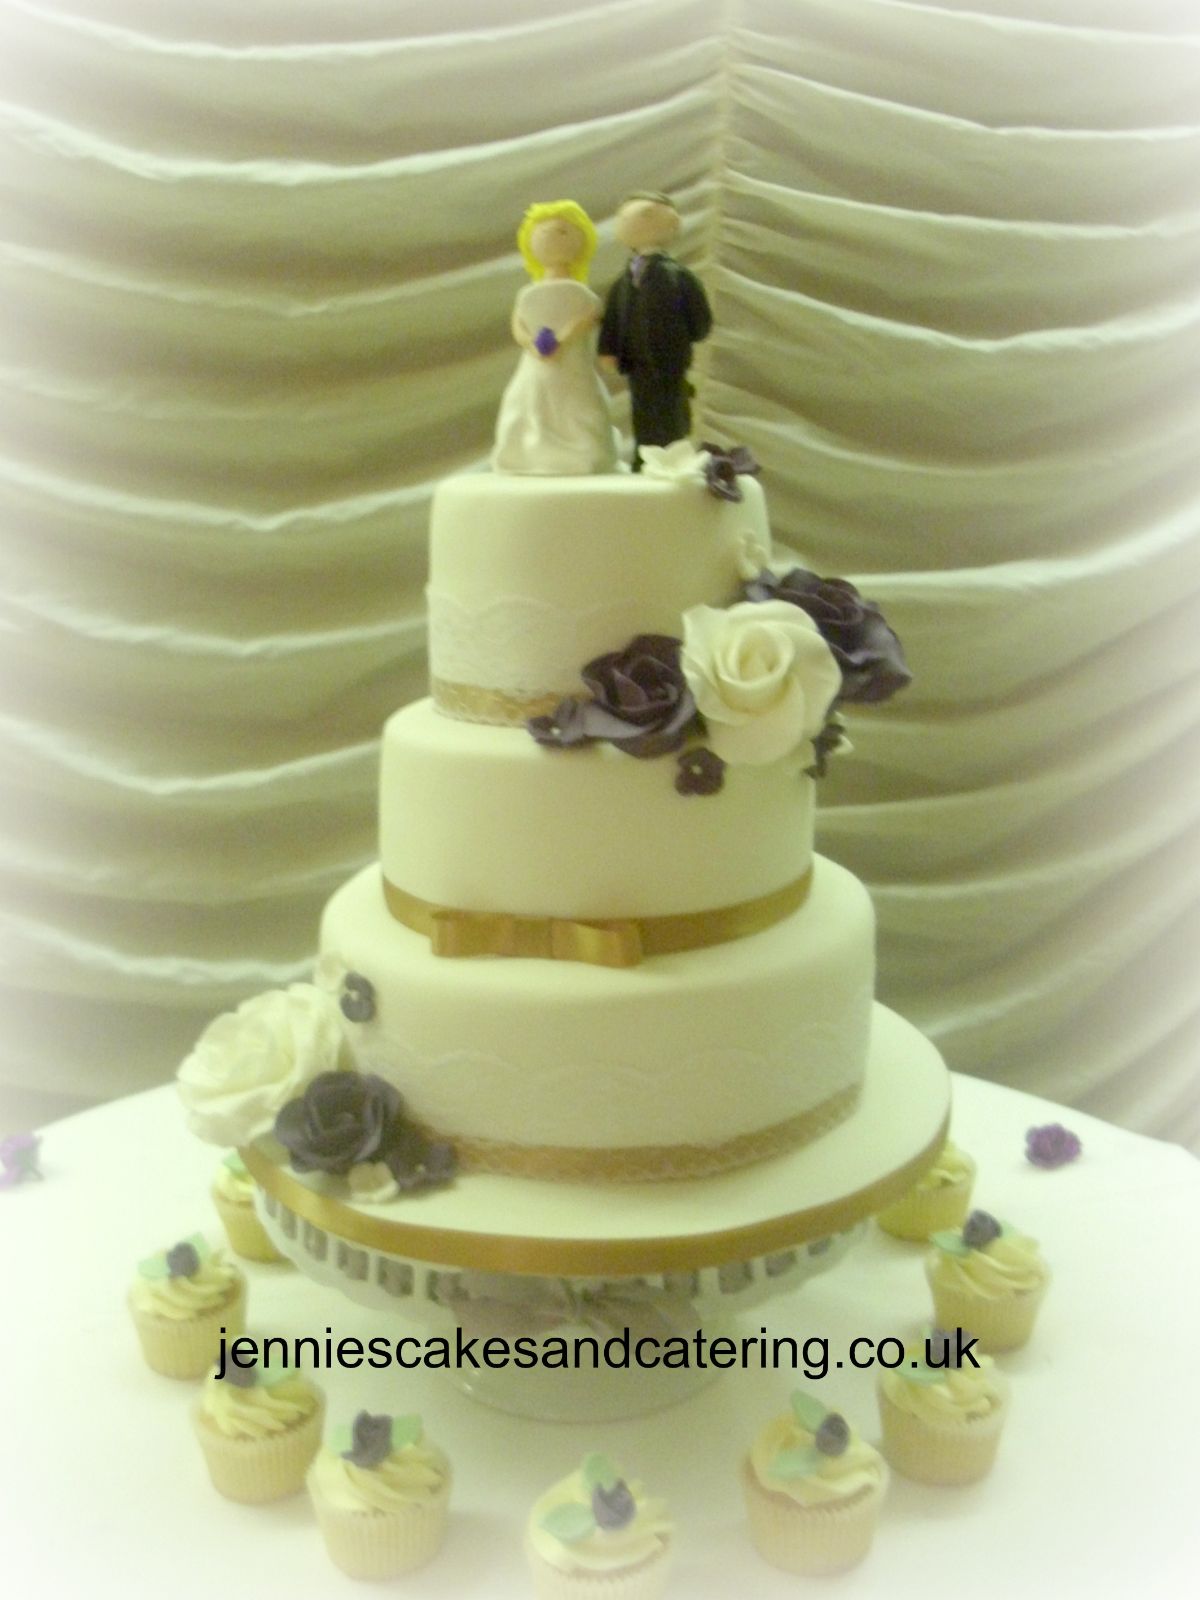 Jennie's cake's and catering-Image-47